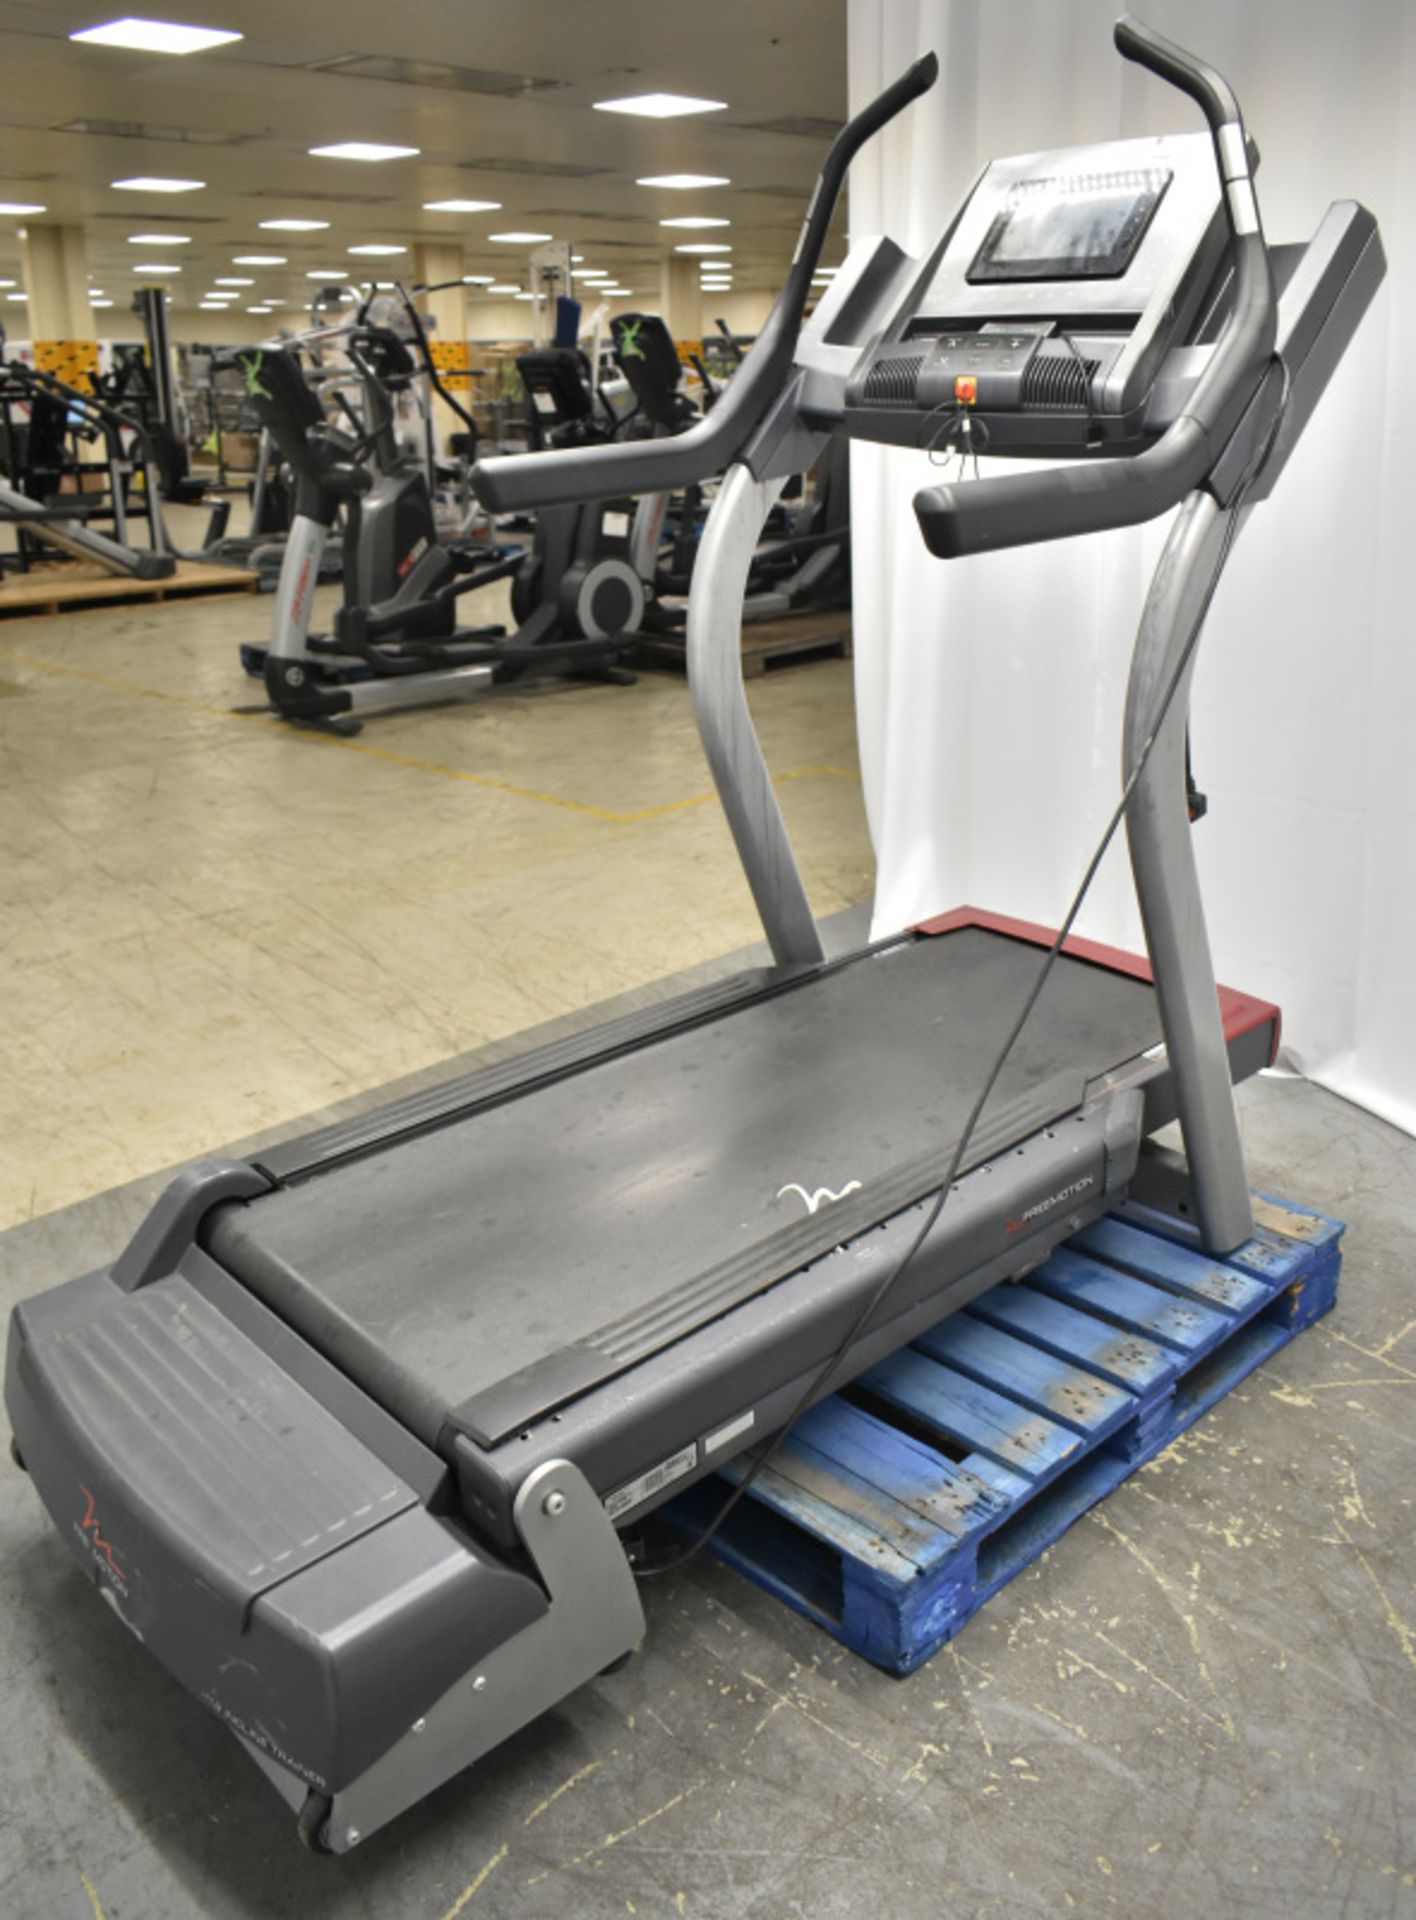 M Freemotion Treadmill - Doesn't Power Up Functions Not Tested - Image 4 of 14